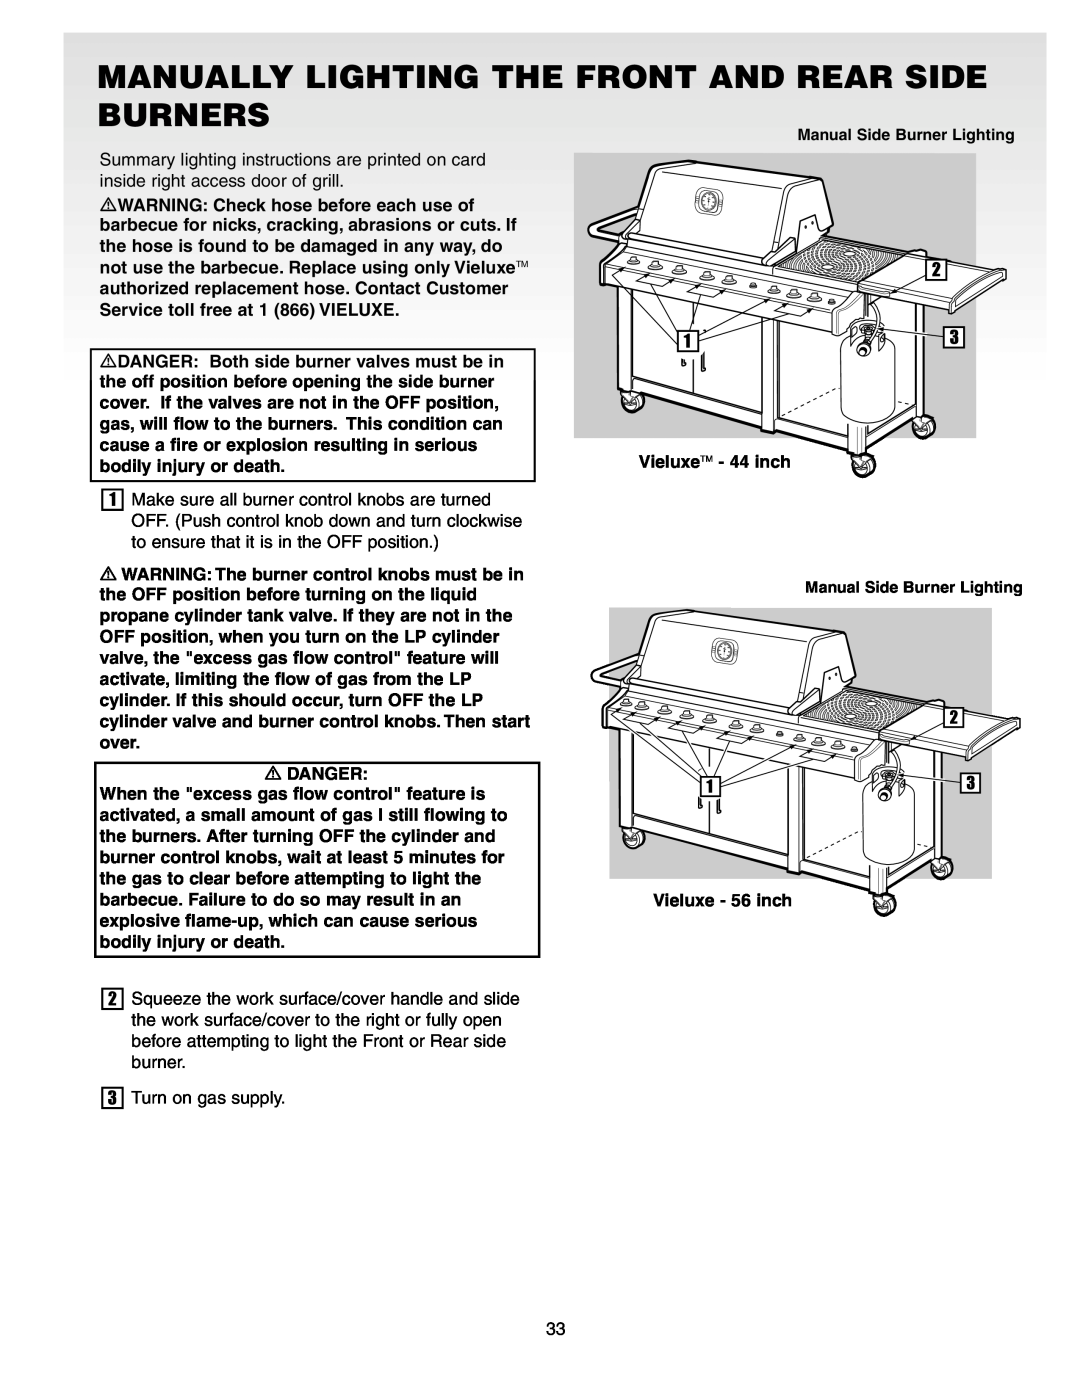 Weber Gas Burner manual Manually Lighting The Front And Rear Side Burners 